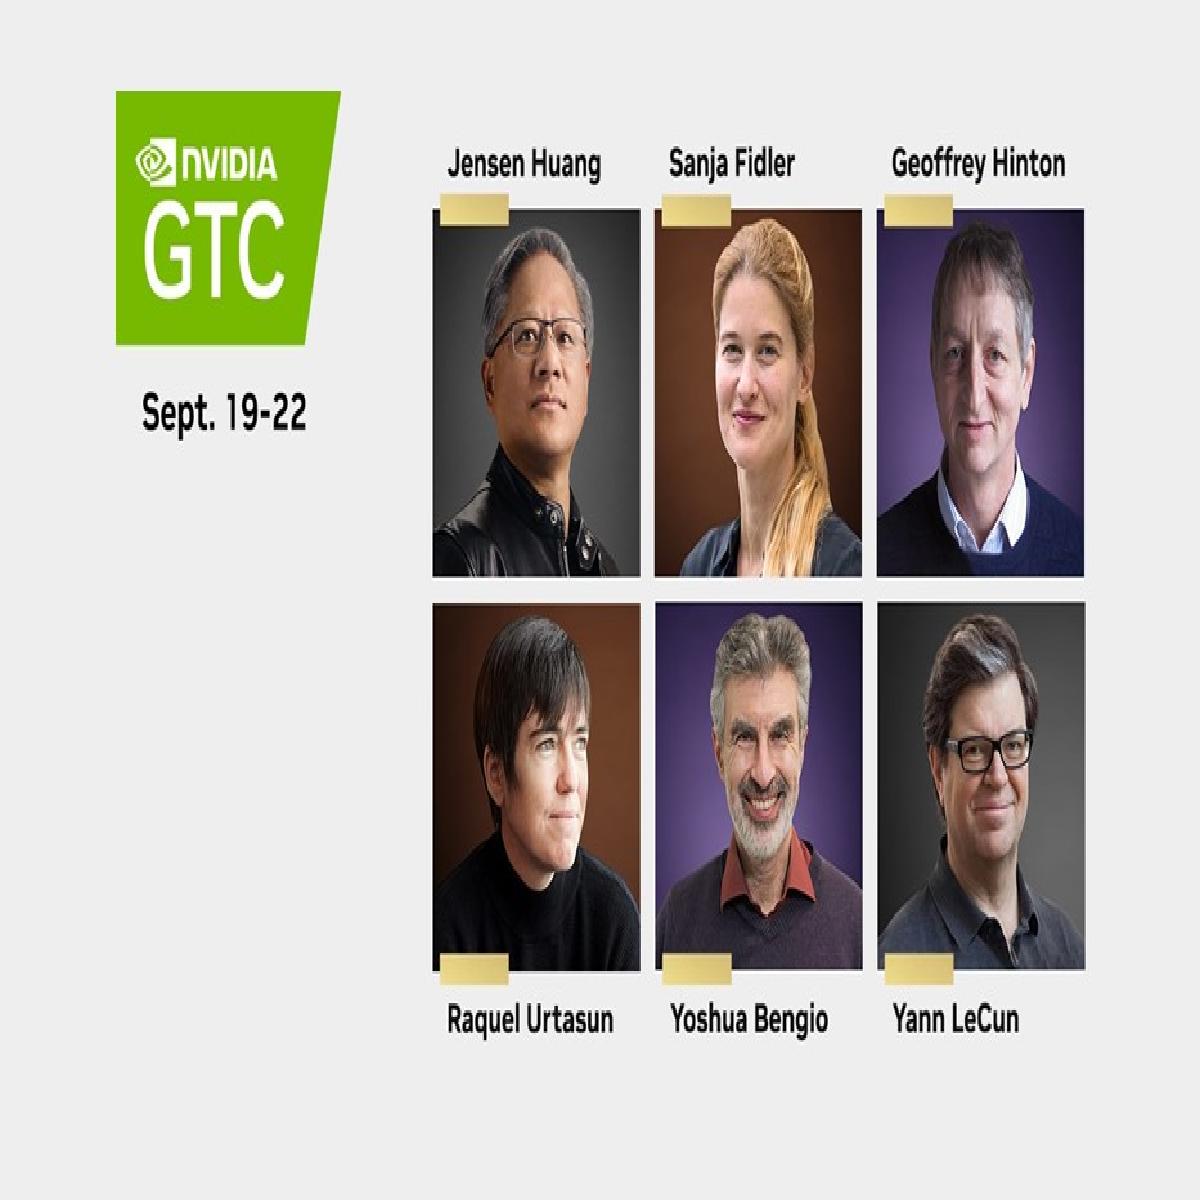 NVIDIA GTC to Feature CEO Jensen Huang Keynote Announcing New AI and Metaverse Technologies, Over 200 Sessions with Top Tech, Business Execs